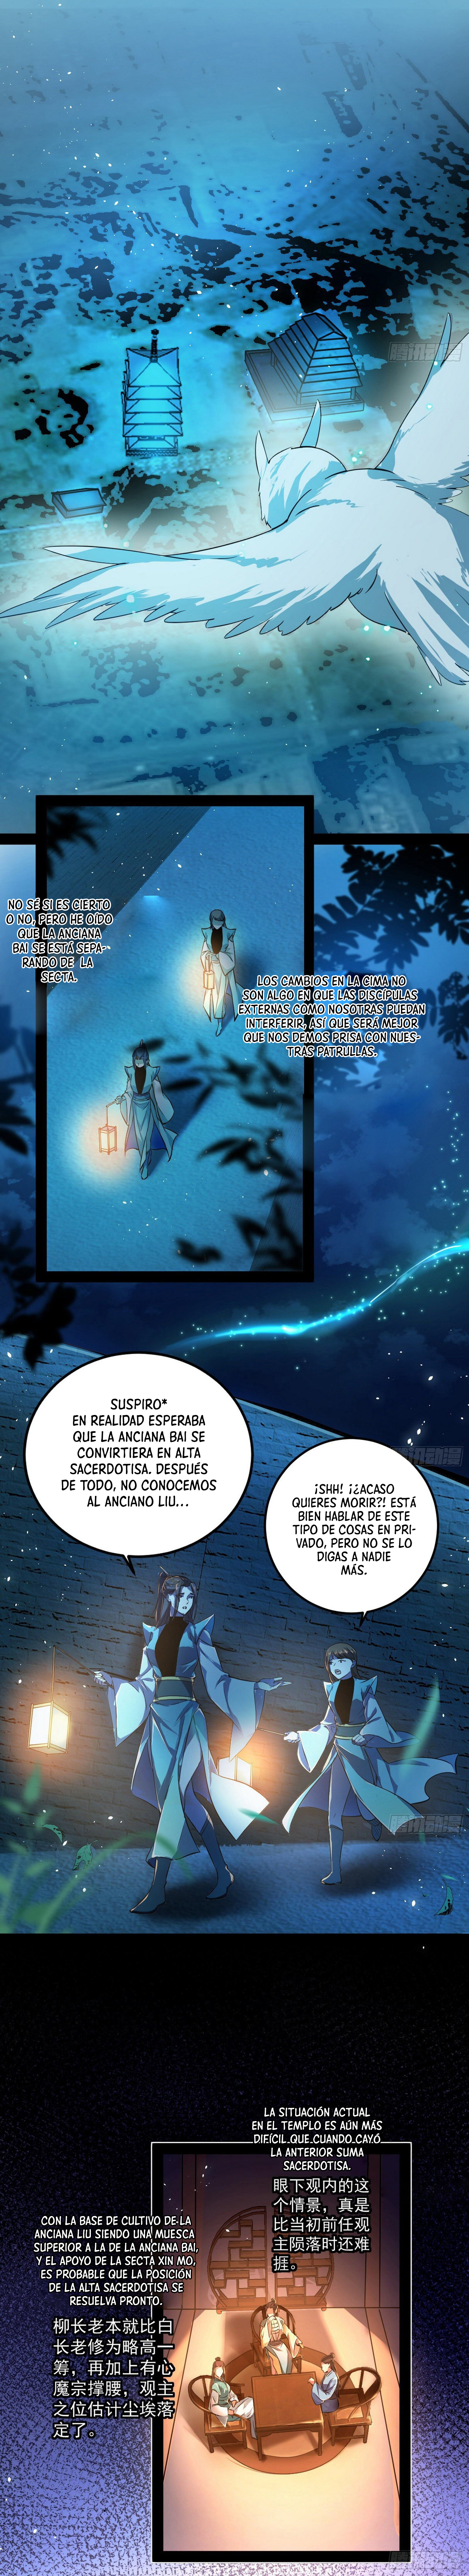 Manga Soy un dios maligno Chapter 93 image number 19